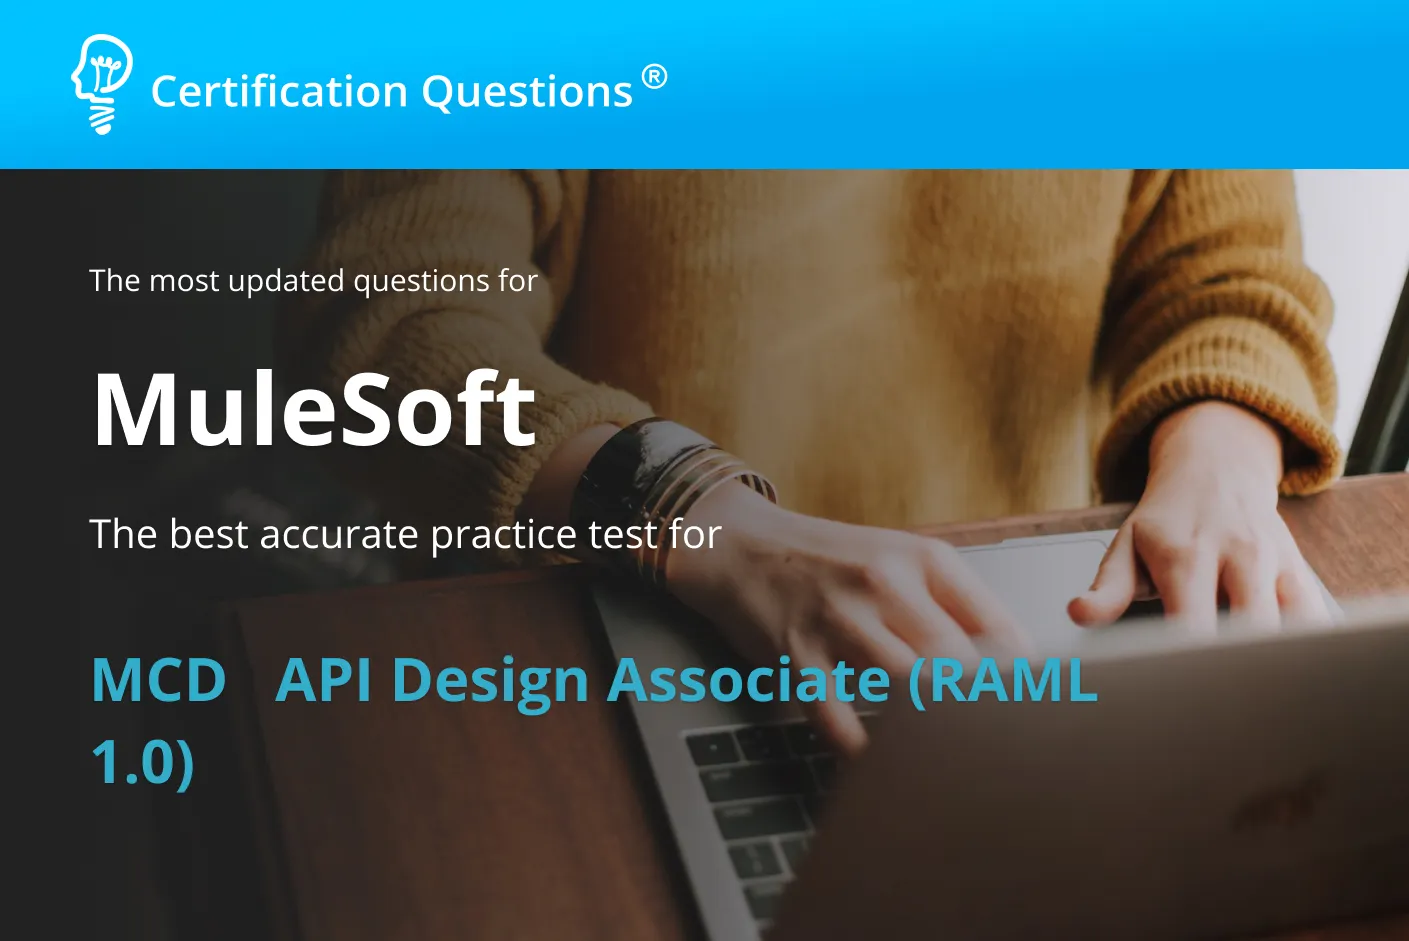 This image is related to the mulesoft platform architect certification questions for the preparation